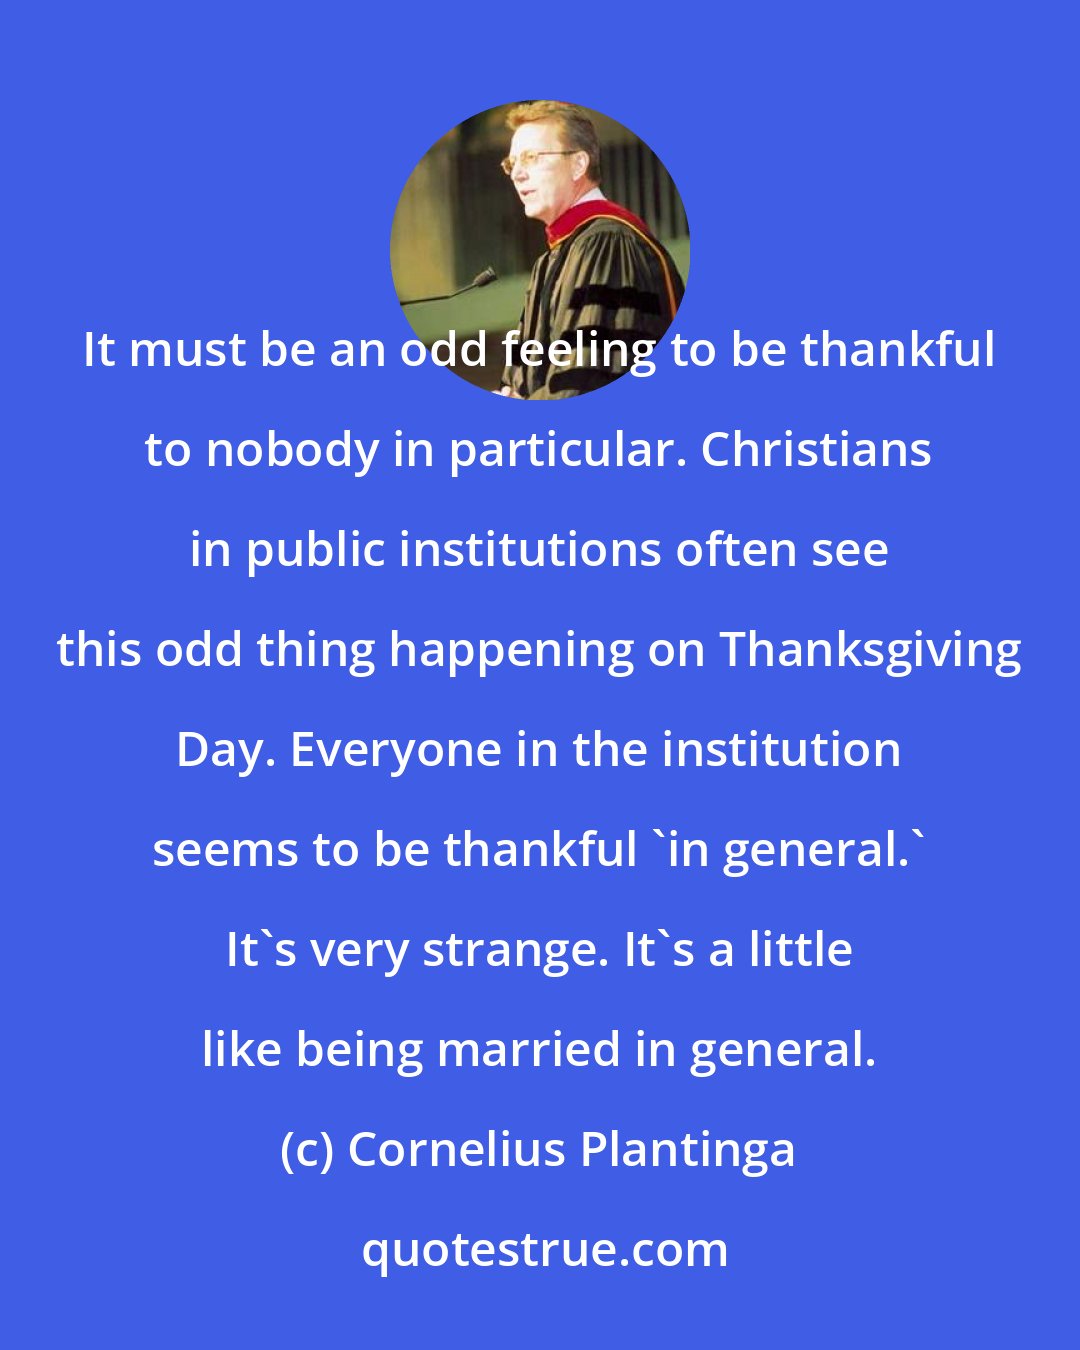 Cornelius Plantinga: It must be an odd feeling to be thankful to nobody in particular. Christians in public institutions often see this odd thing happening on Thanksgiving Day. Everyone in the institution seems to be thankful 'in general.' It's very strange. It's a little like being married in general.